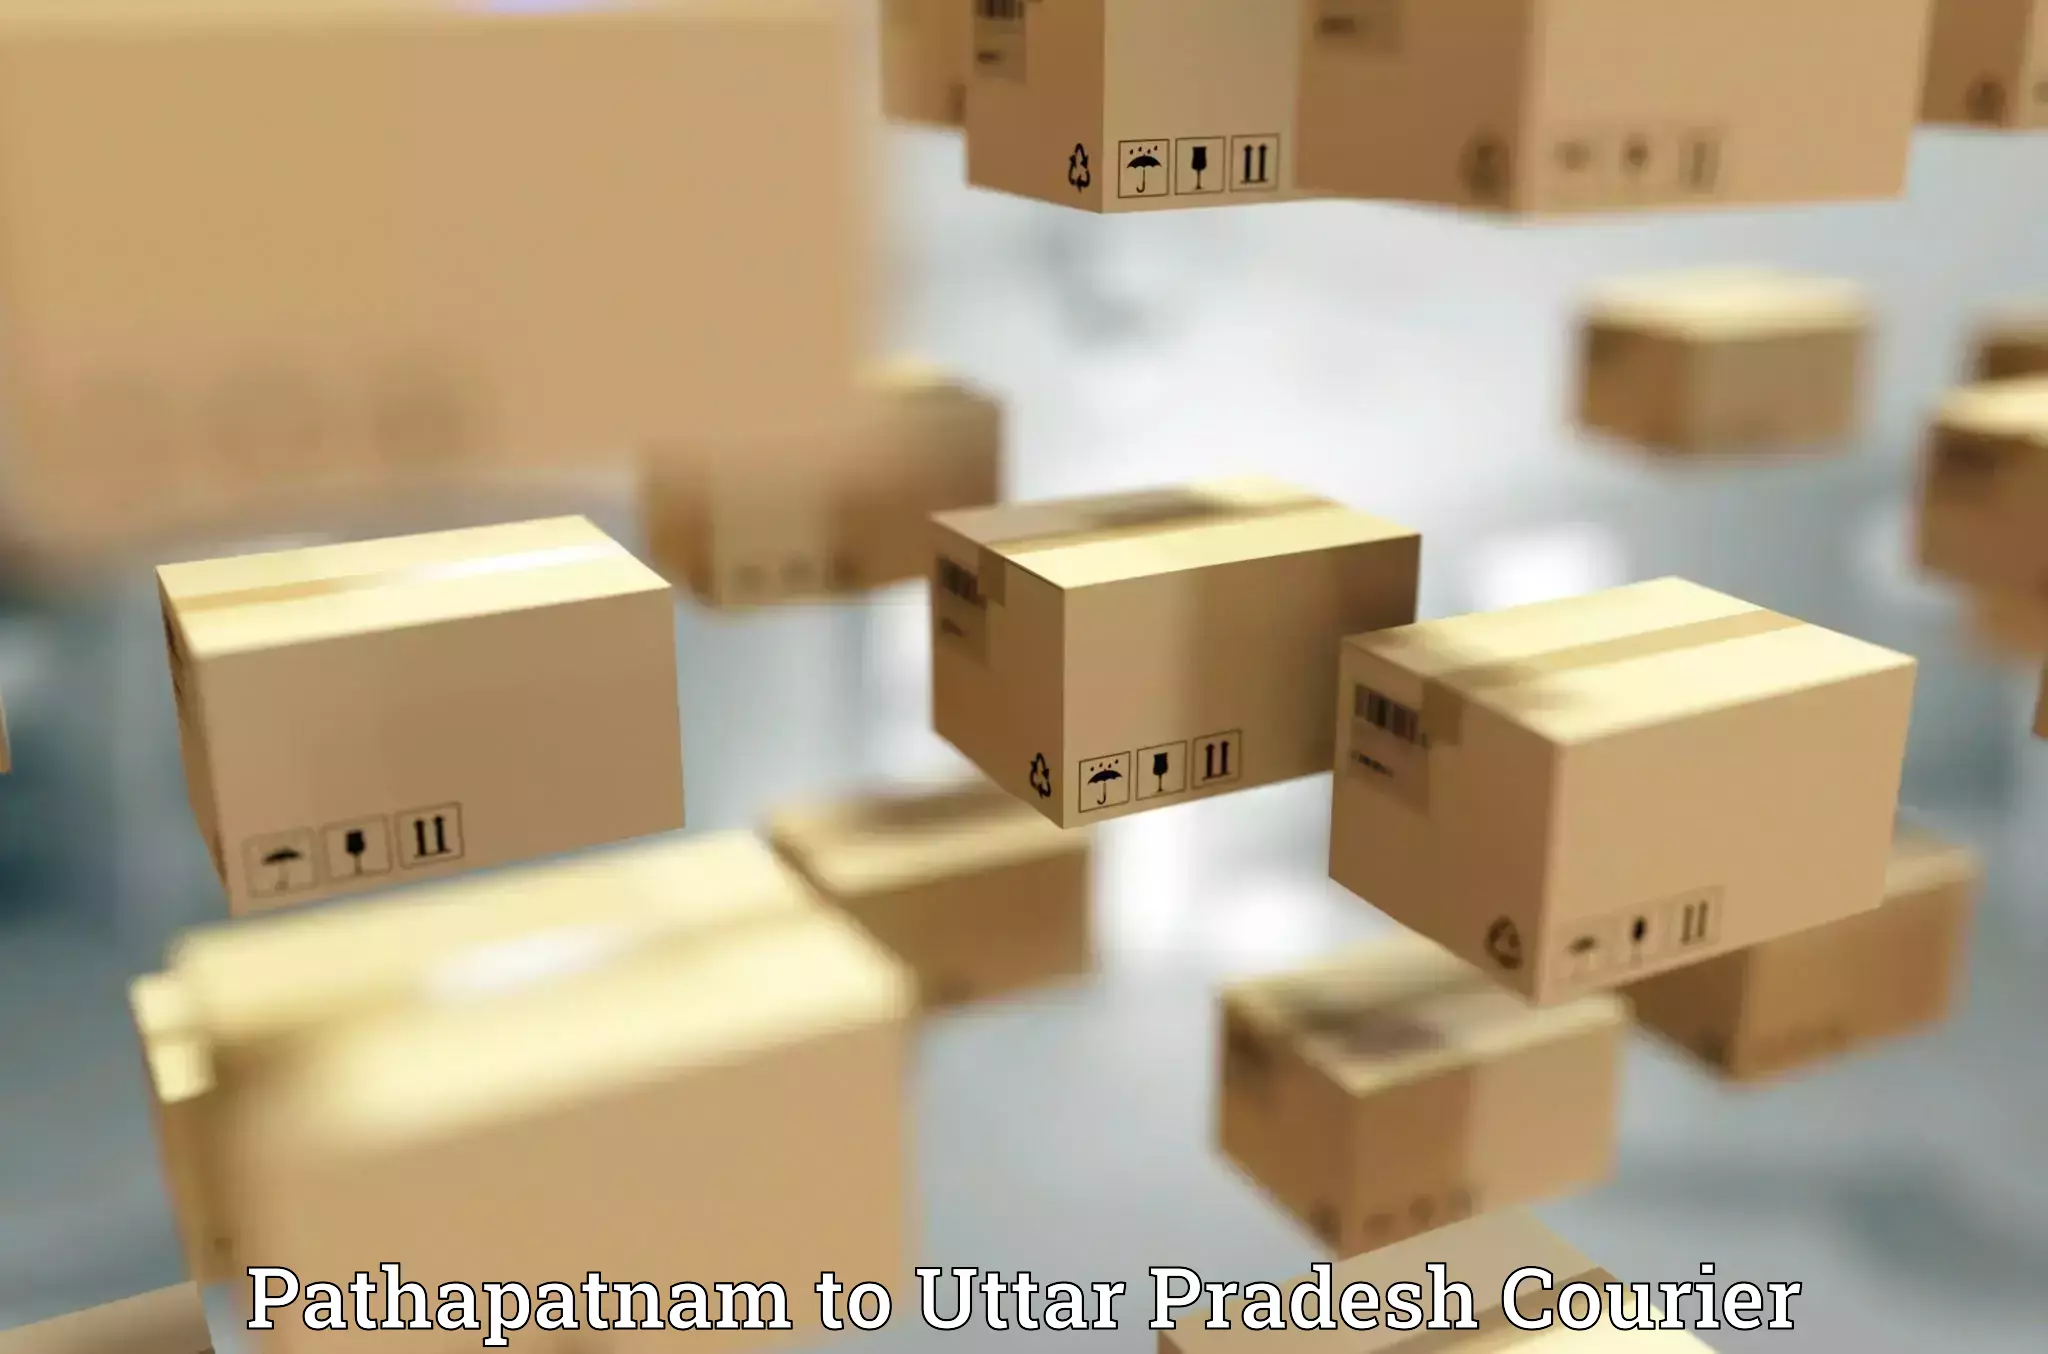 Reliable delivery network Pathapatnam to Najibabad